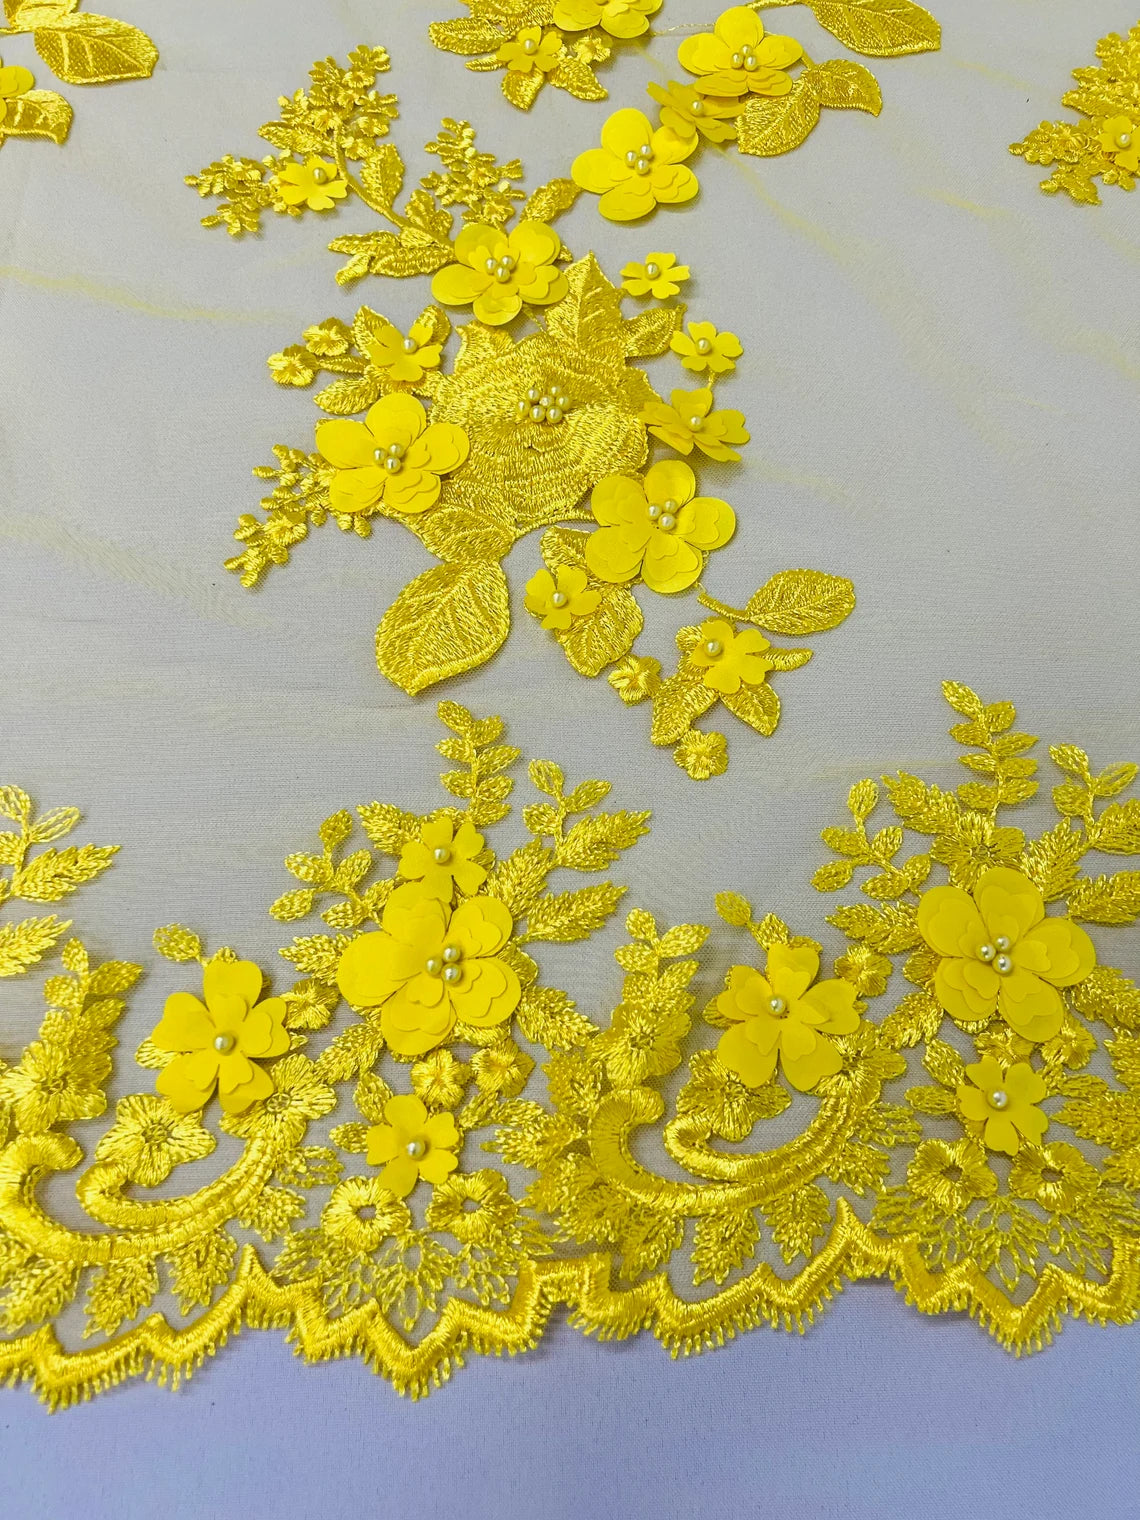 3D Flower Panels Fabric - Yellow - Flower Panels Bead Embroidered on Lace Fabric Sold By Yard